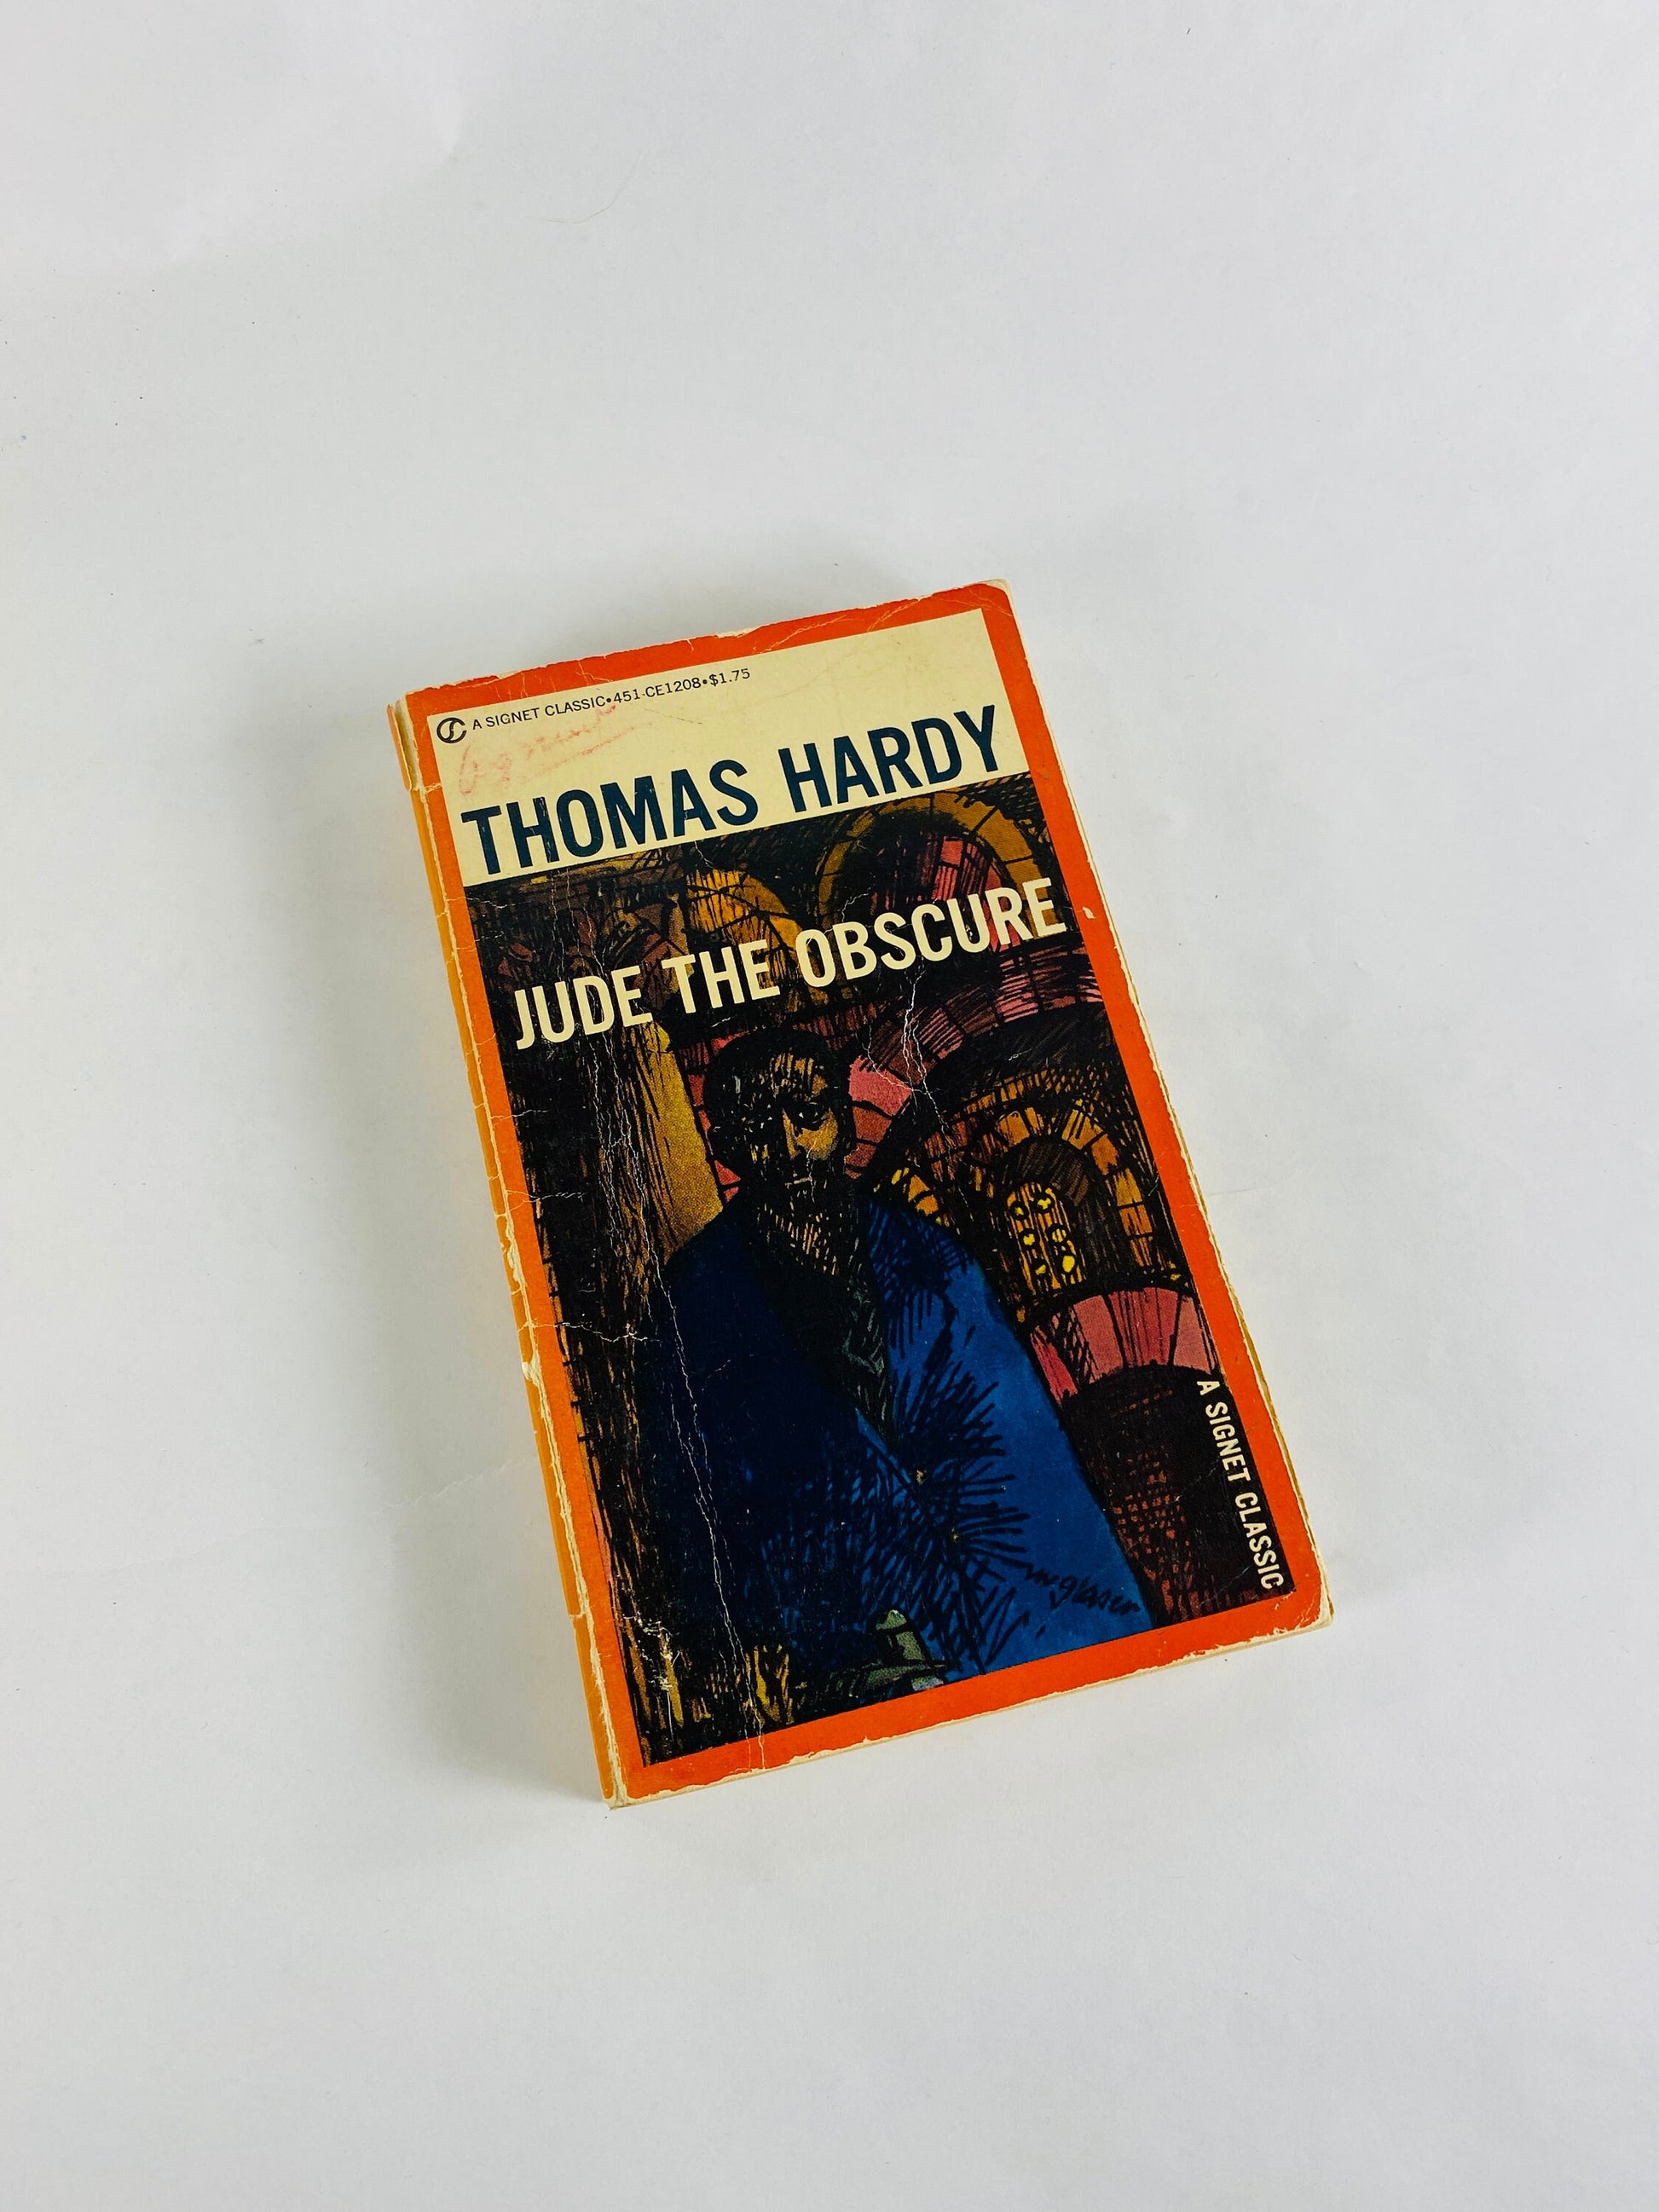 Jude the Obscure by Thomas Hardy Vintage paperback book about a man who falls in love with a sensitive, freethinking 'New Woman'.